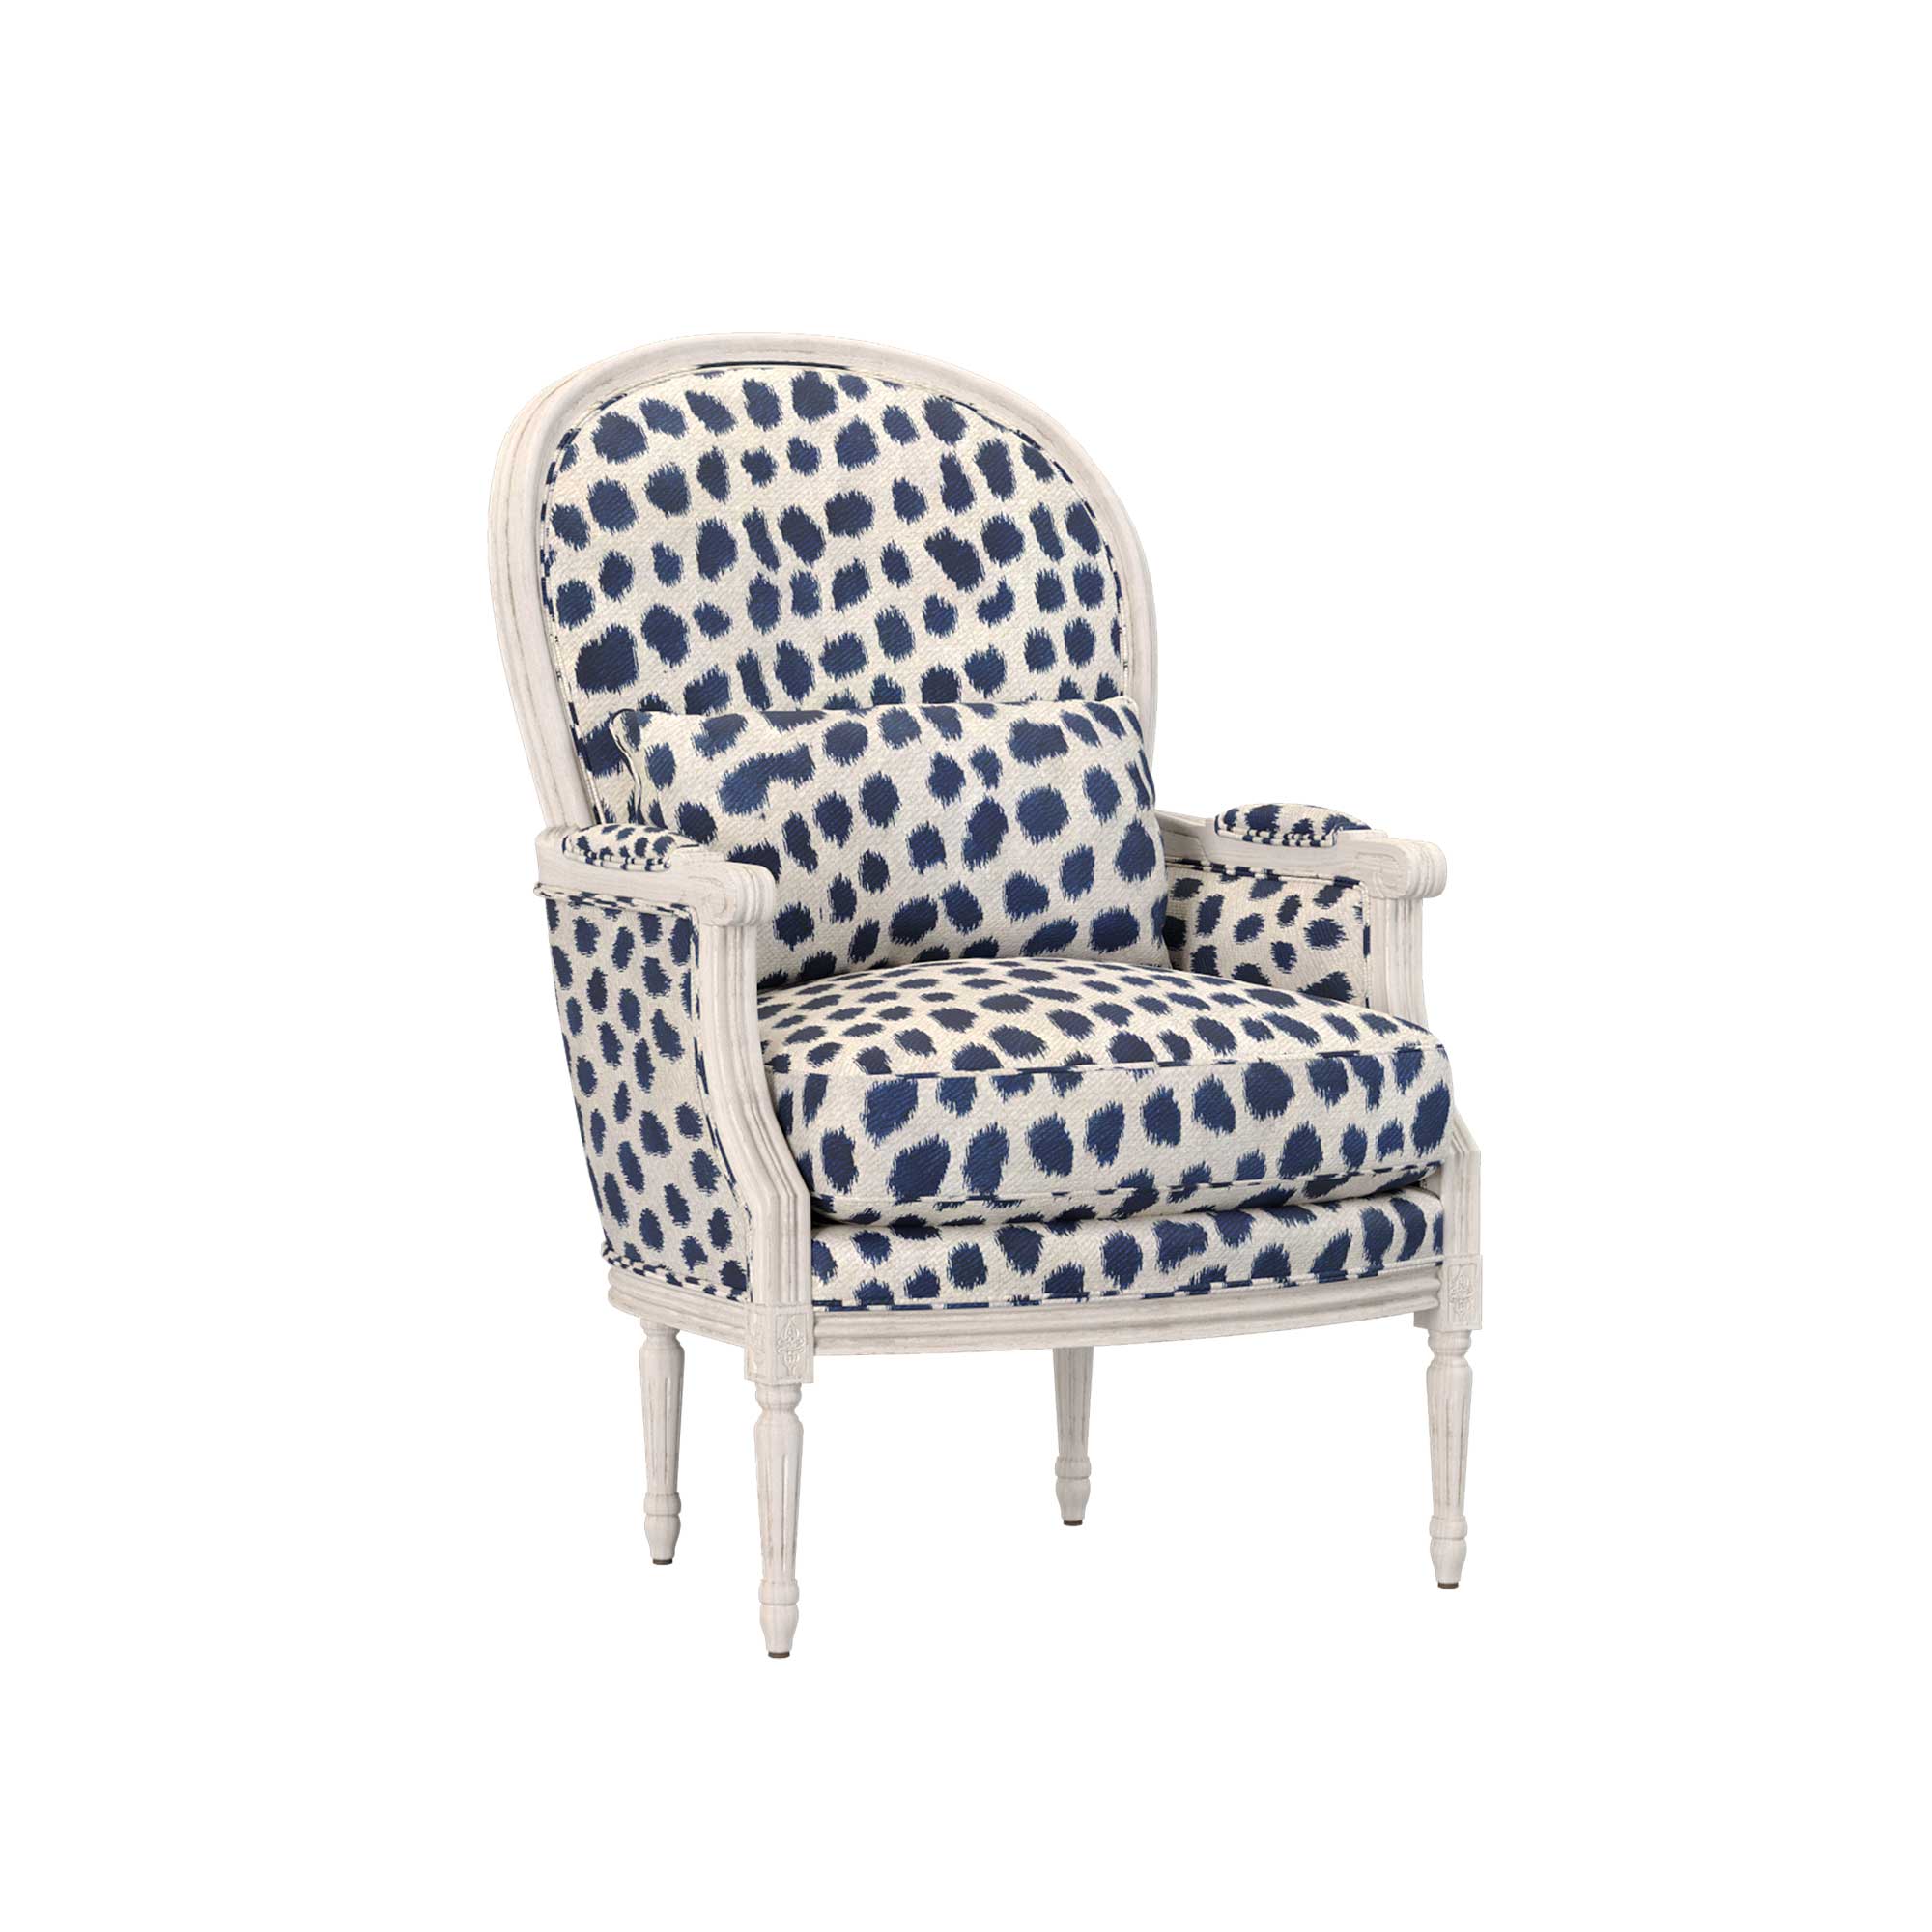 Adele Classic Lounge Chair in Navy Spot